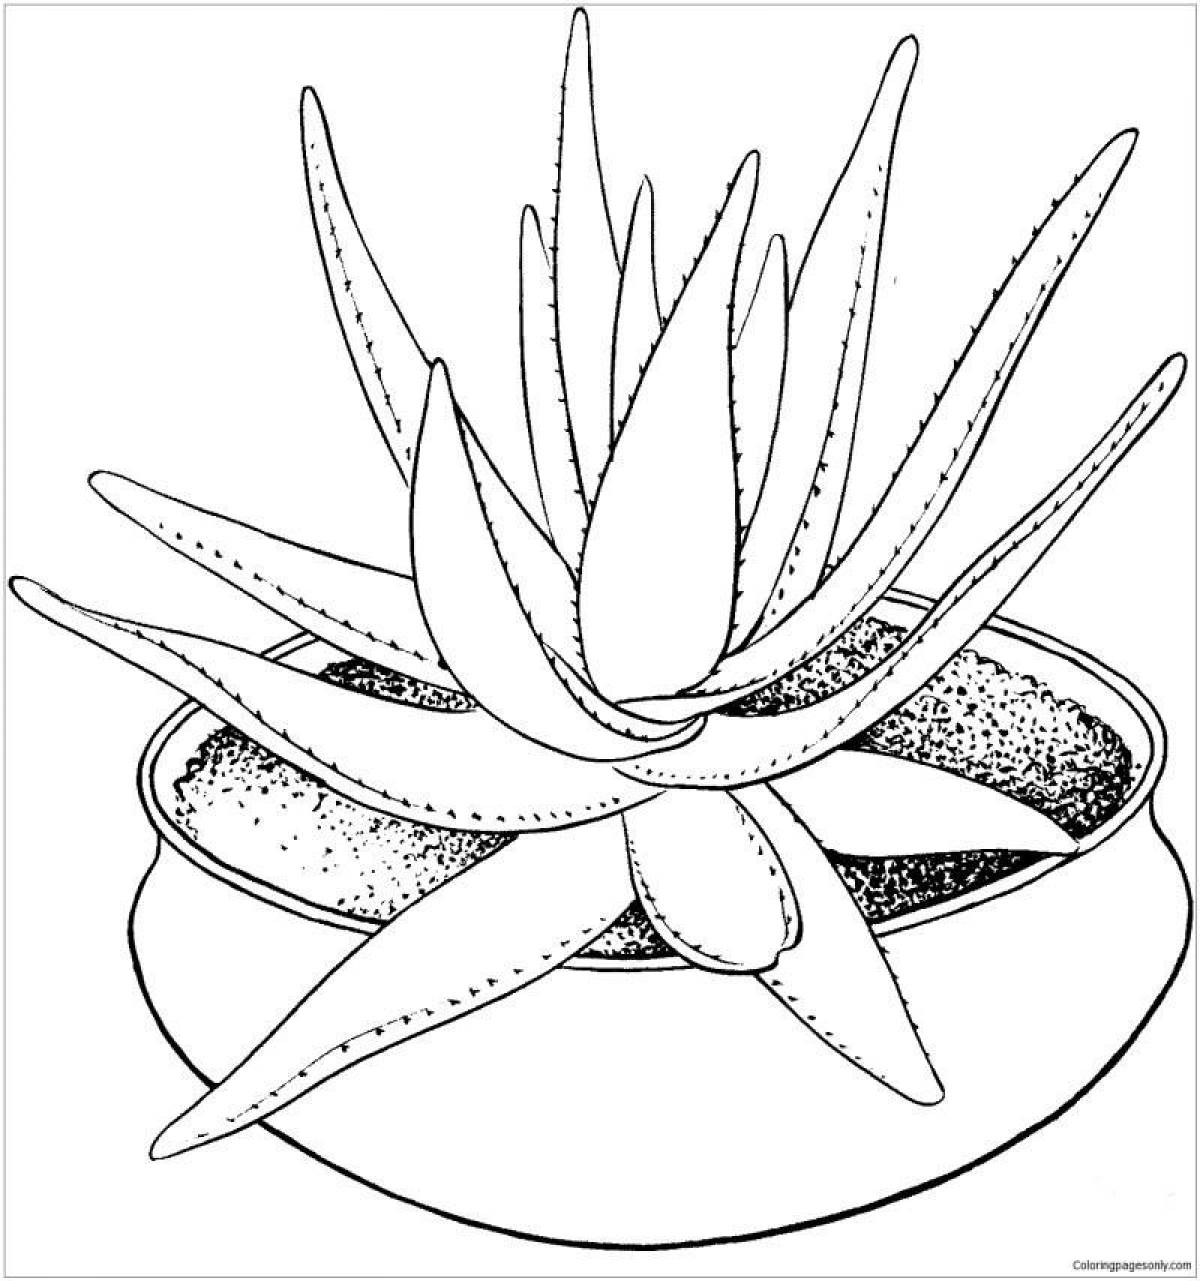 Exquisite houseplant coloring book